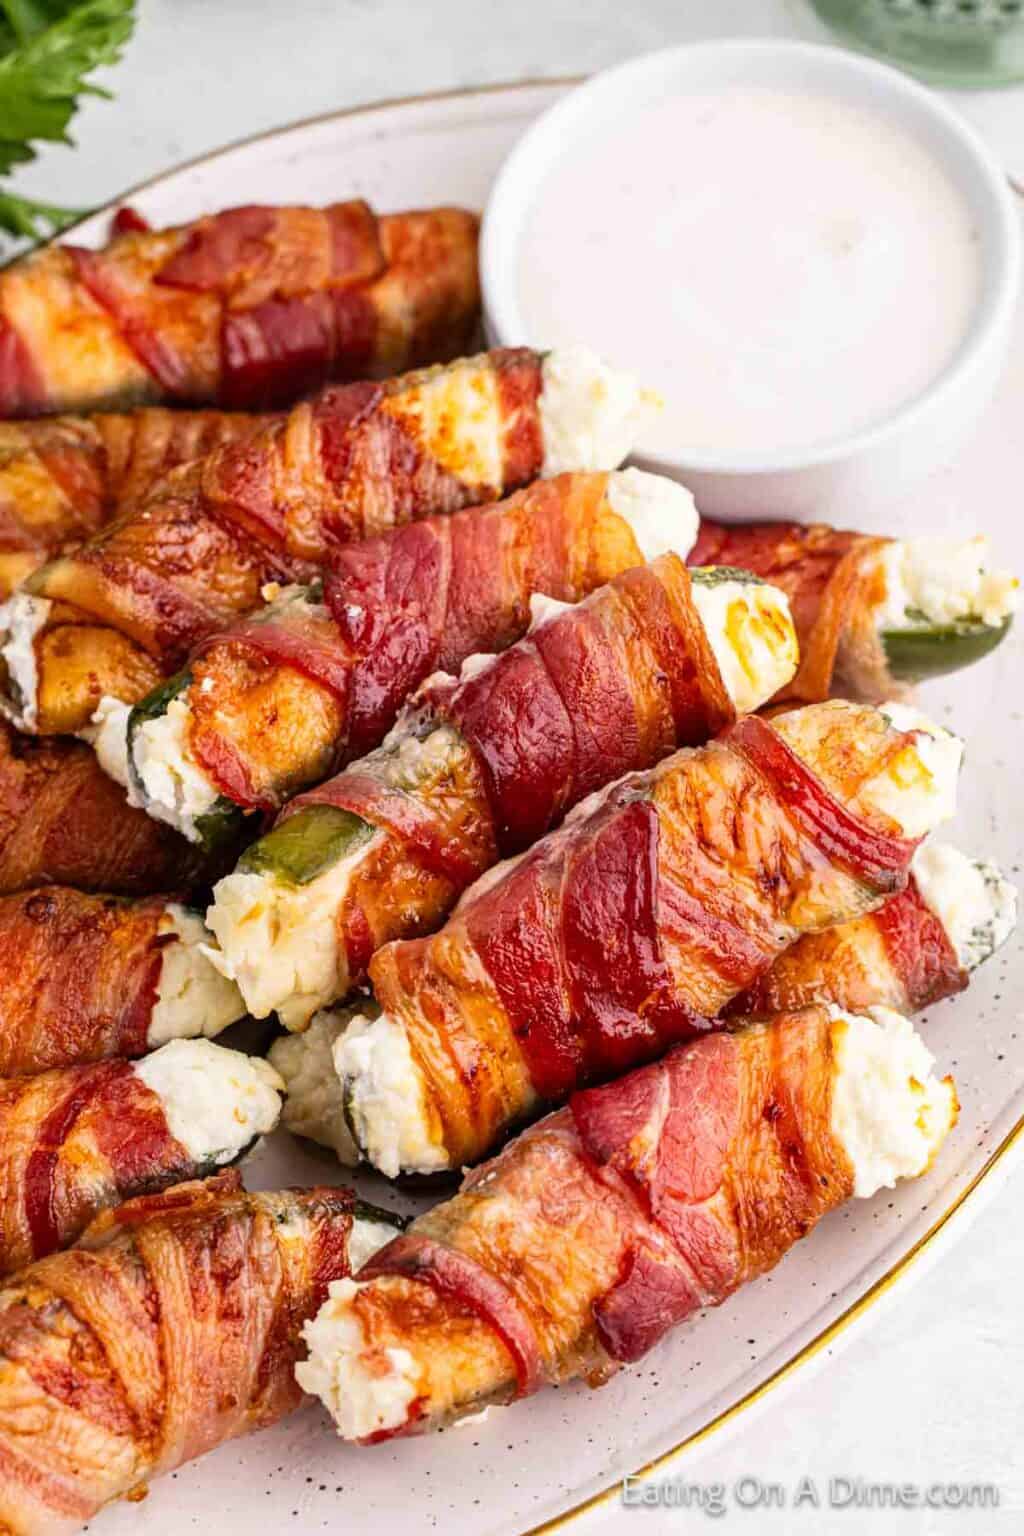 Bacon wrapped jalapeno poppers - Easy appetizer recipe